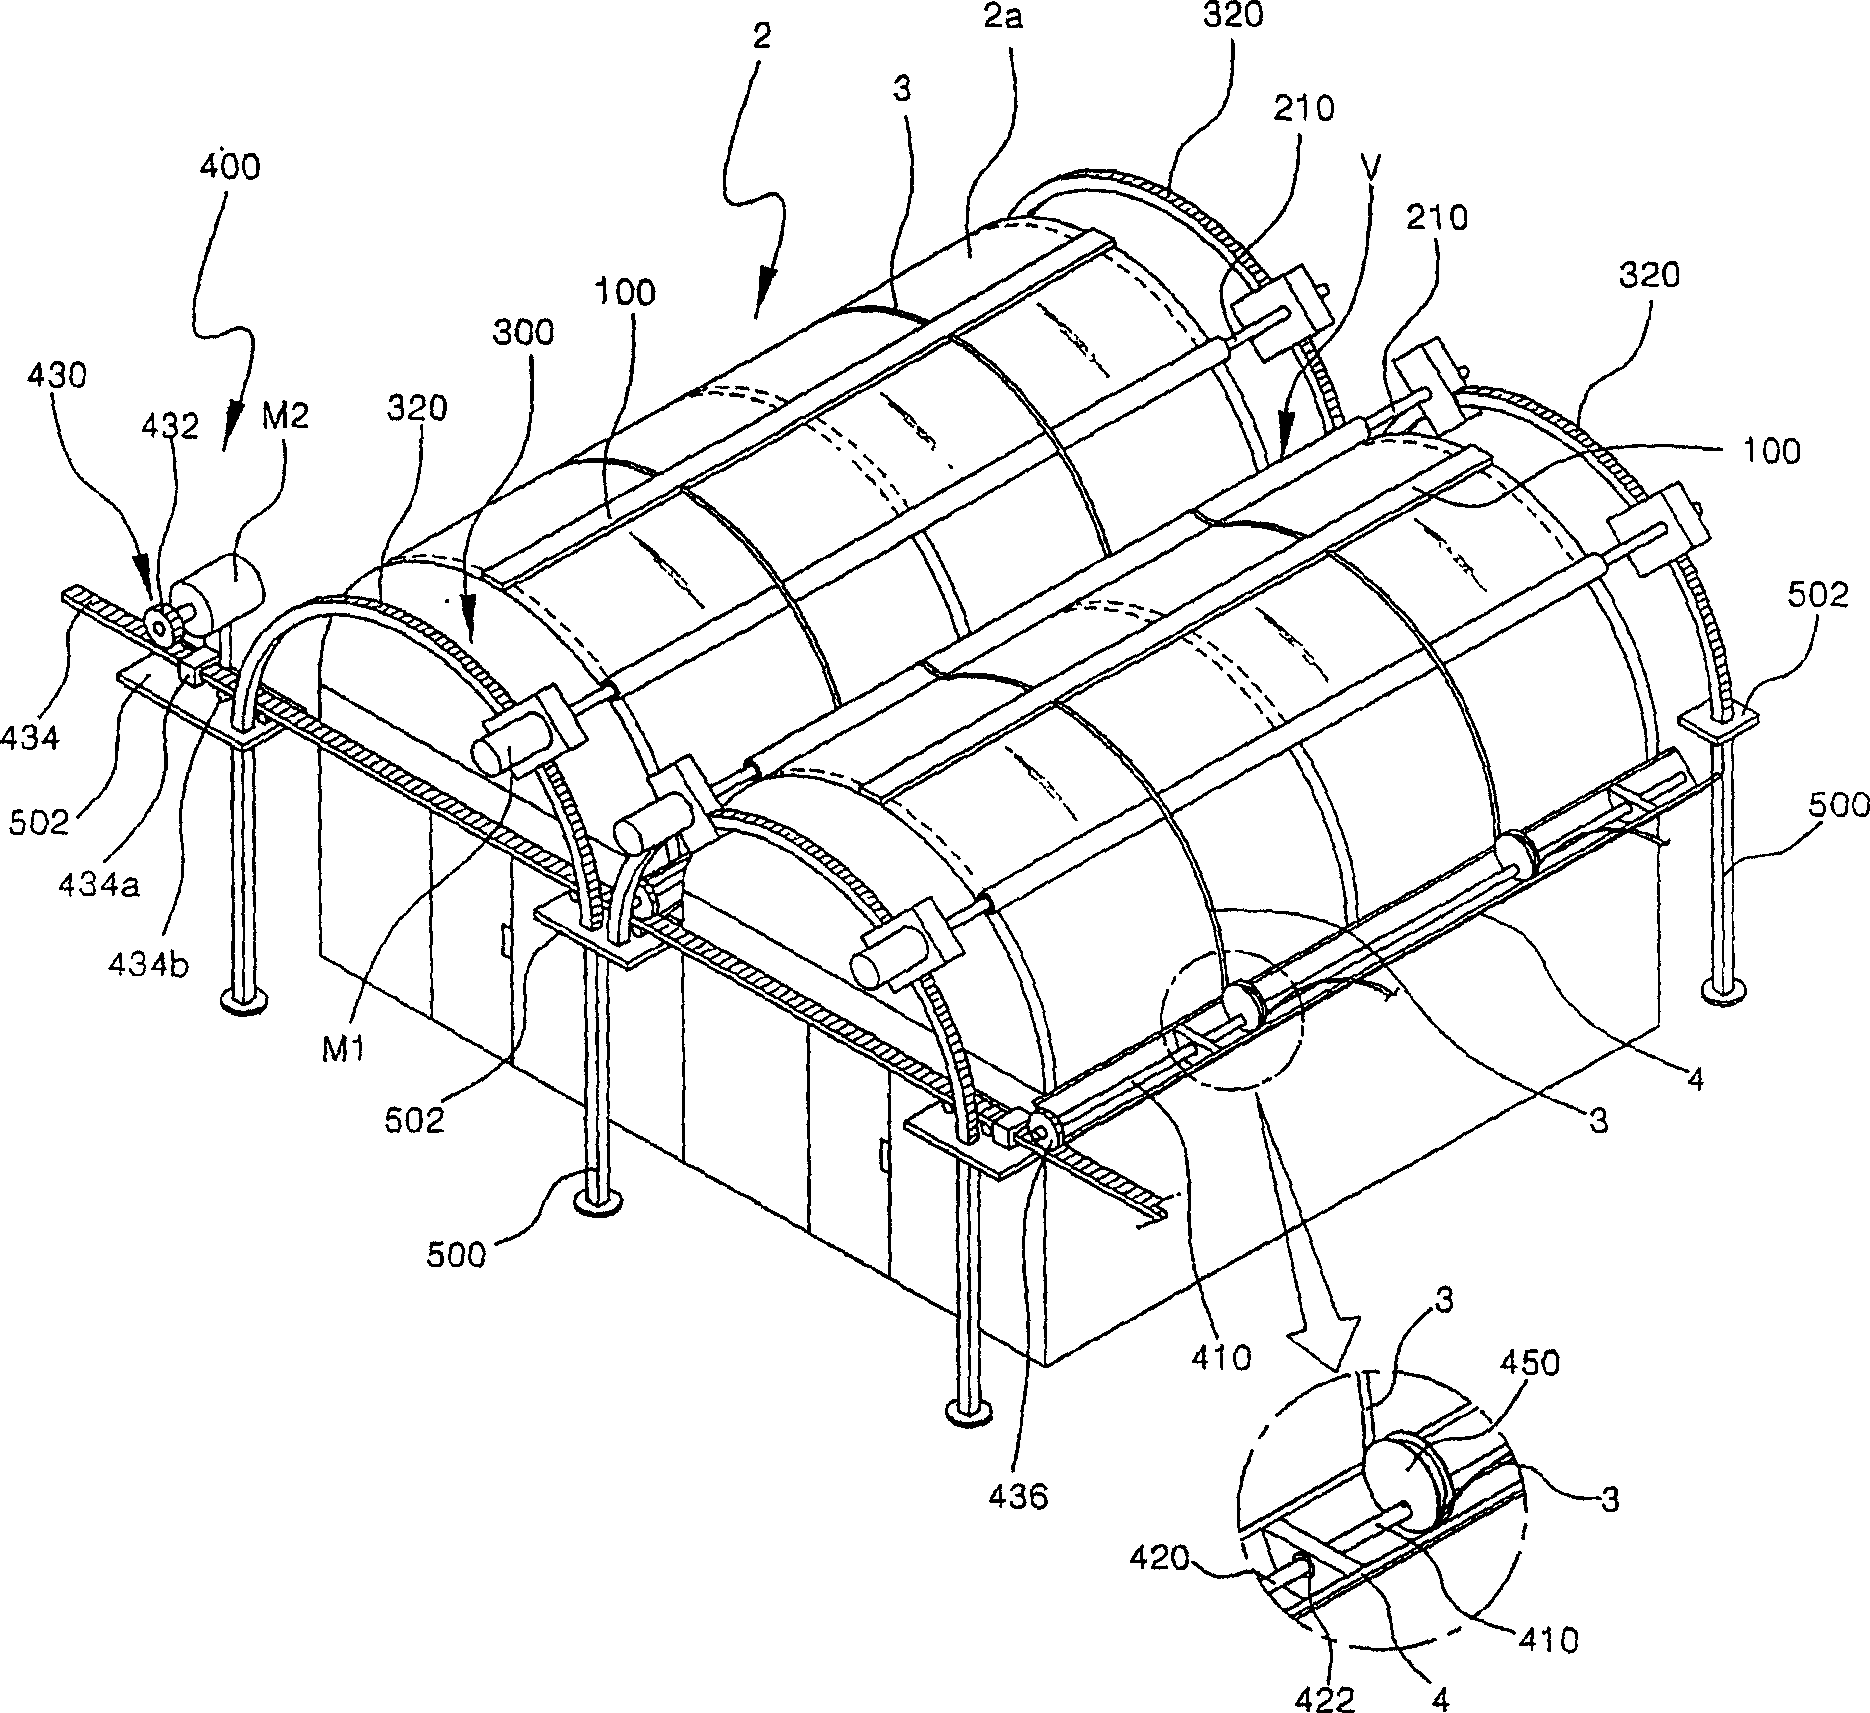 Automatic soft roof opening system for multi-span greenhouses